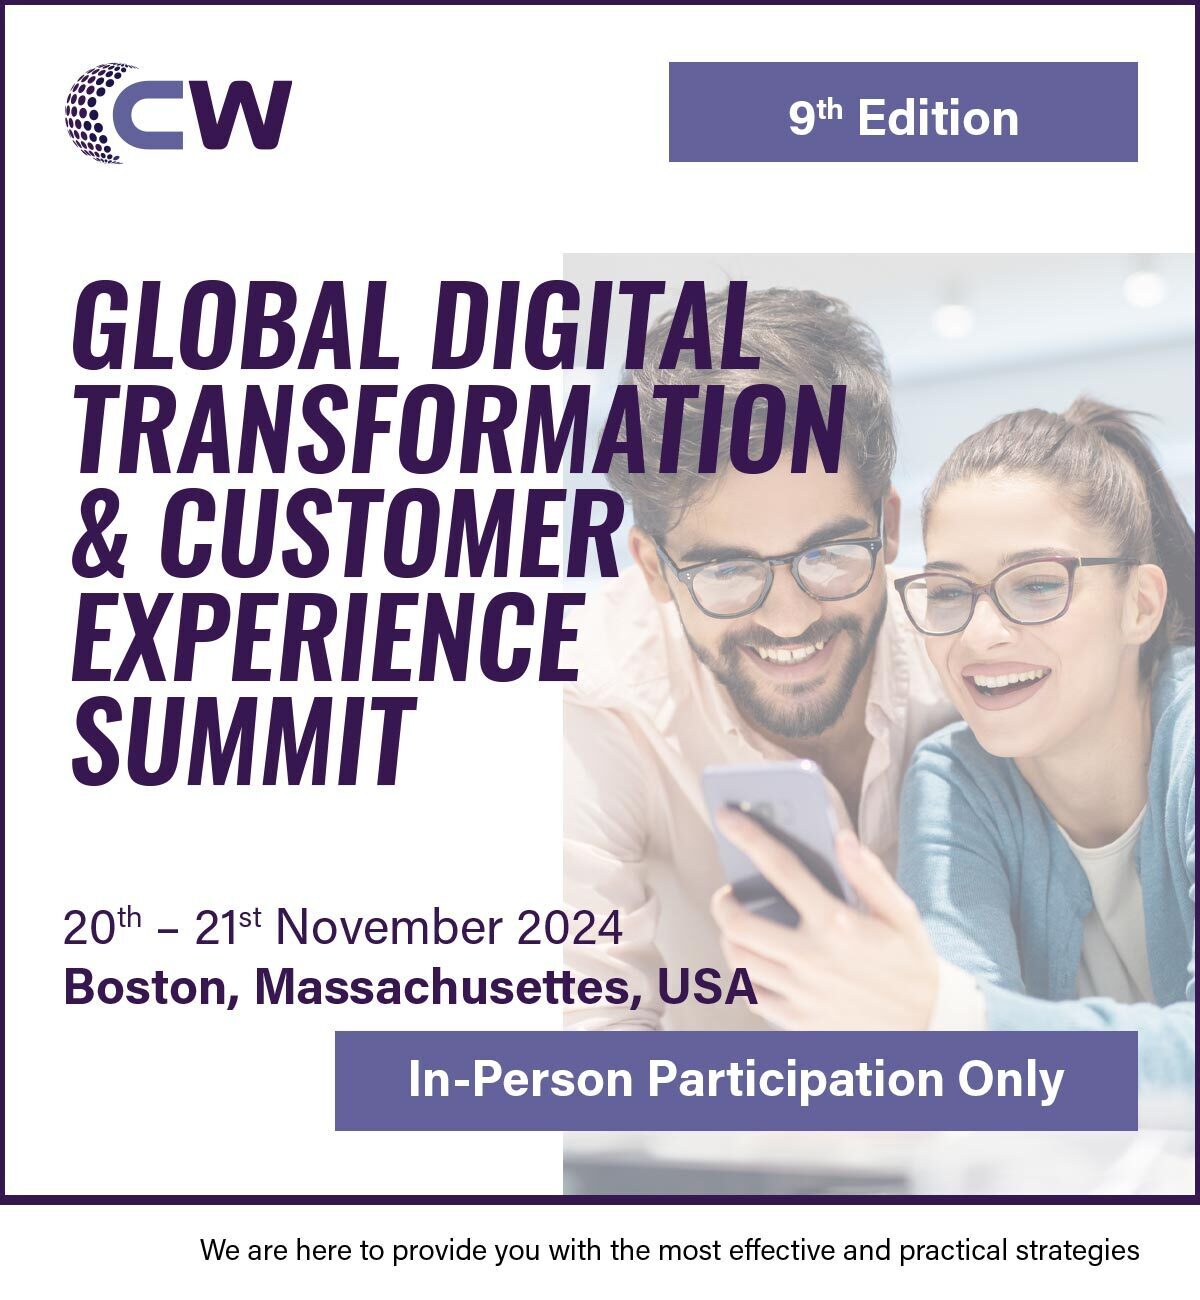 GLOBAL DIGITAL TRANSFORMATION AND CUSTOMER EXPERIENCE SUMMIT organized by Conferenzia World